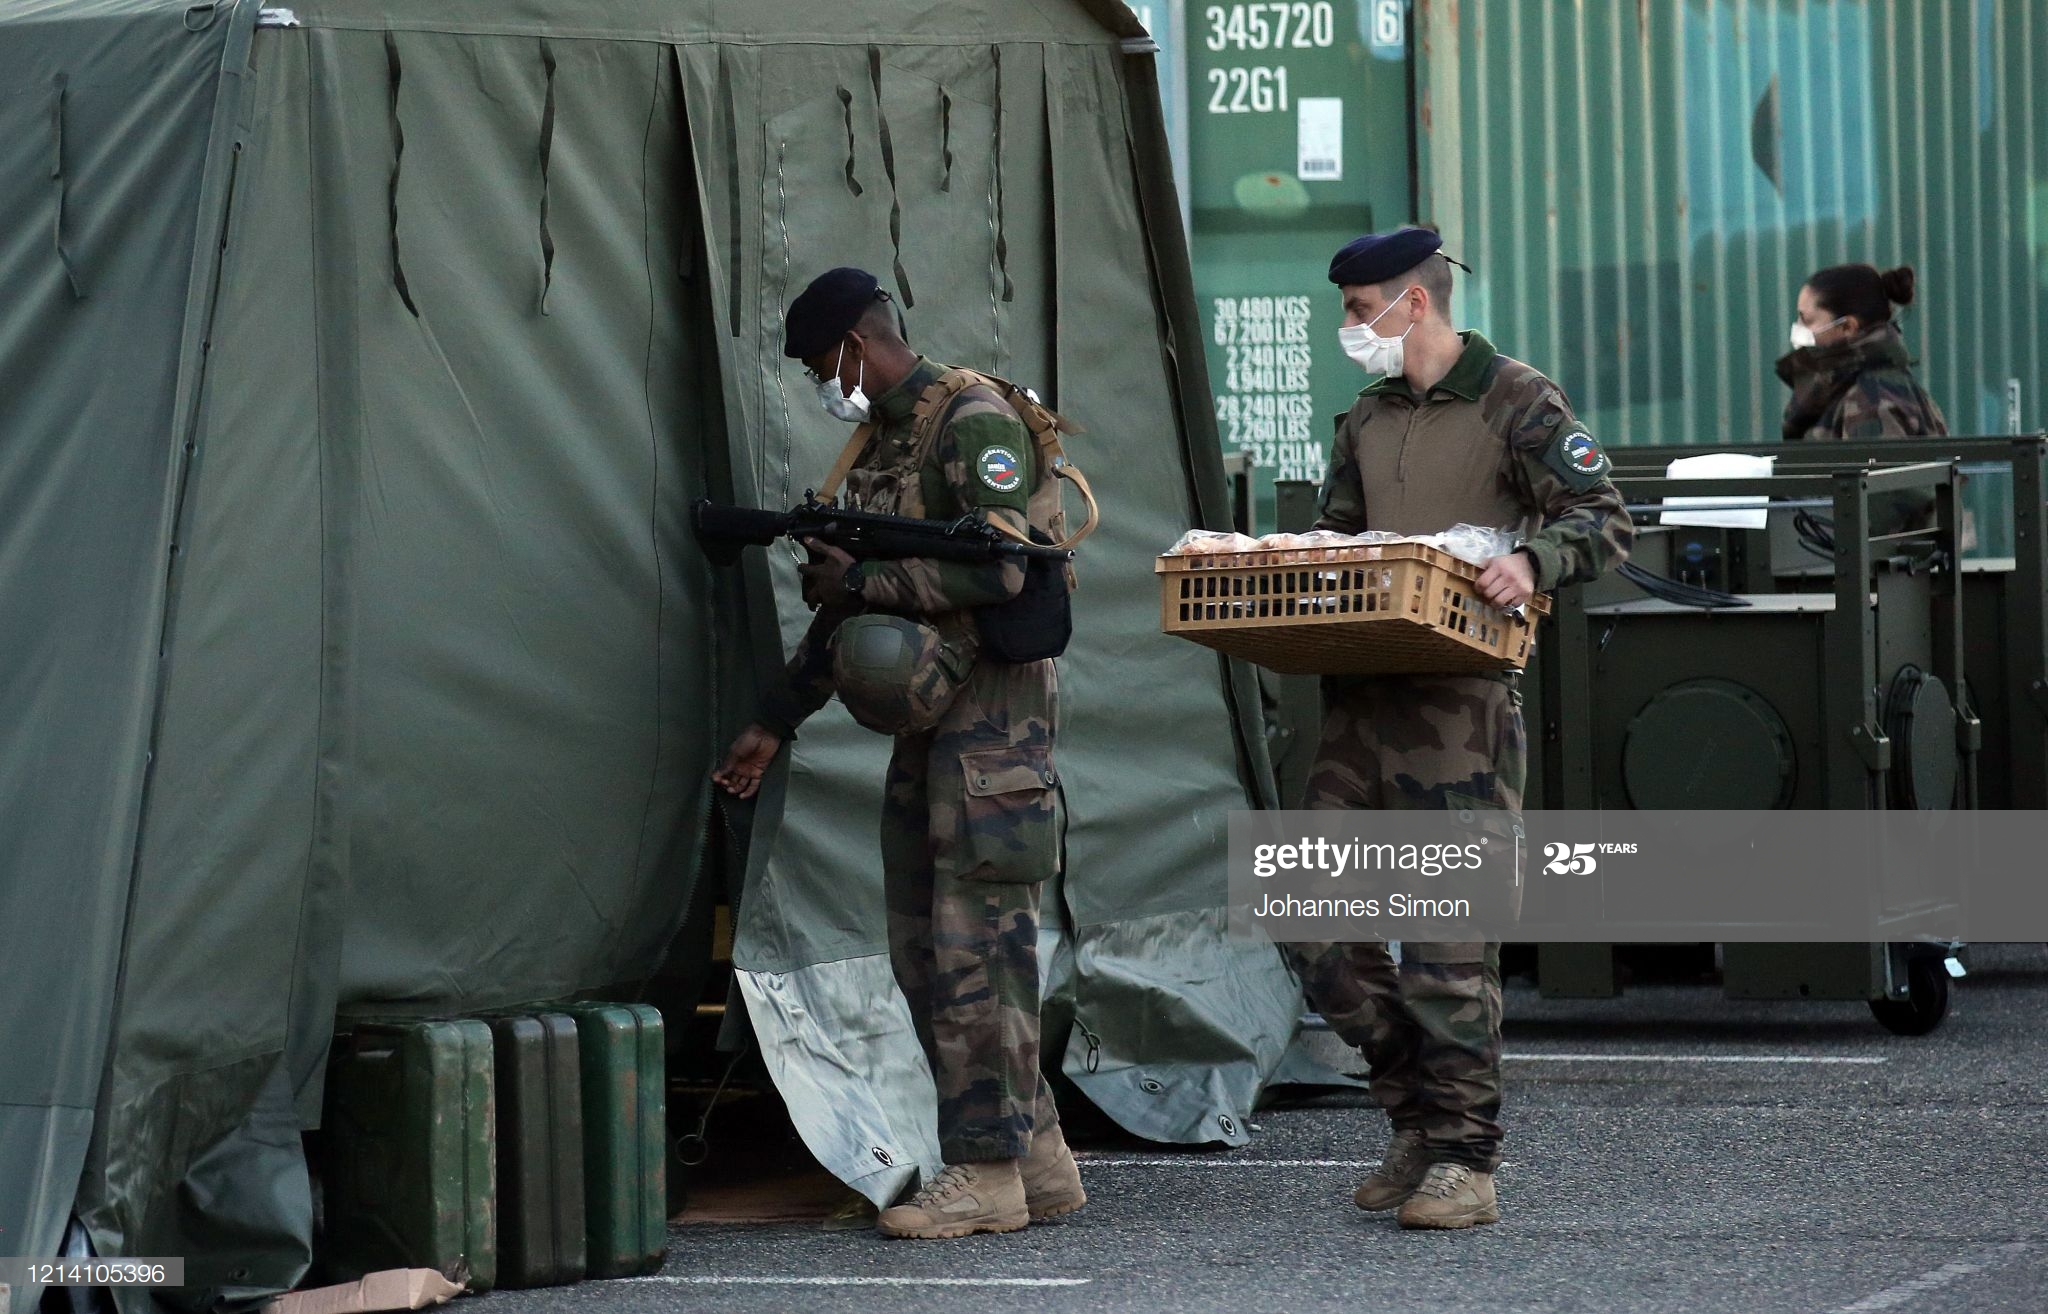 french-soldiers-wearing-protective-masks-set-up-tents-as-part-of-a-picture-id1214105396